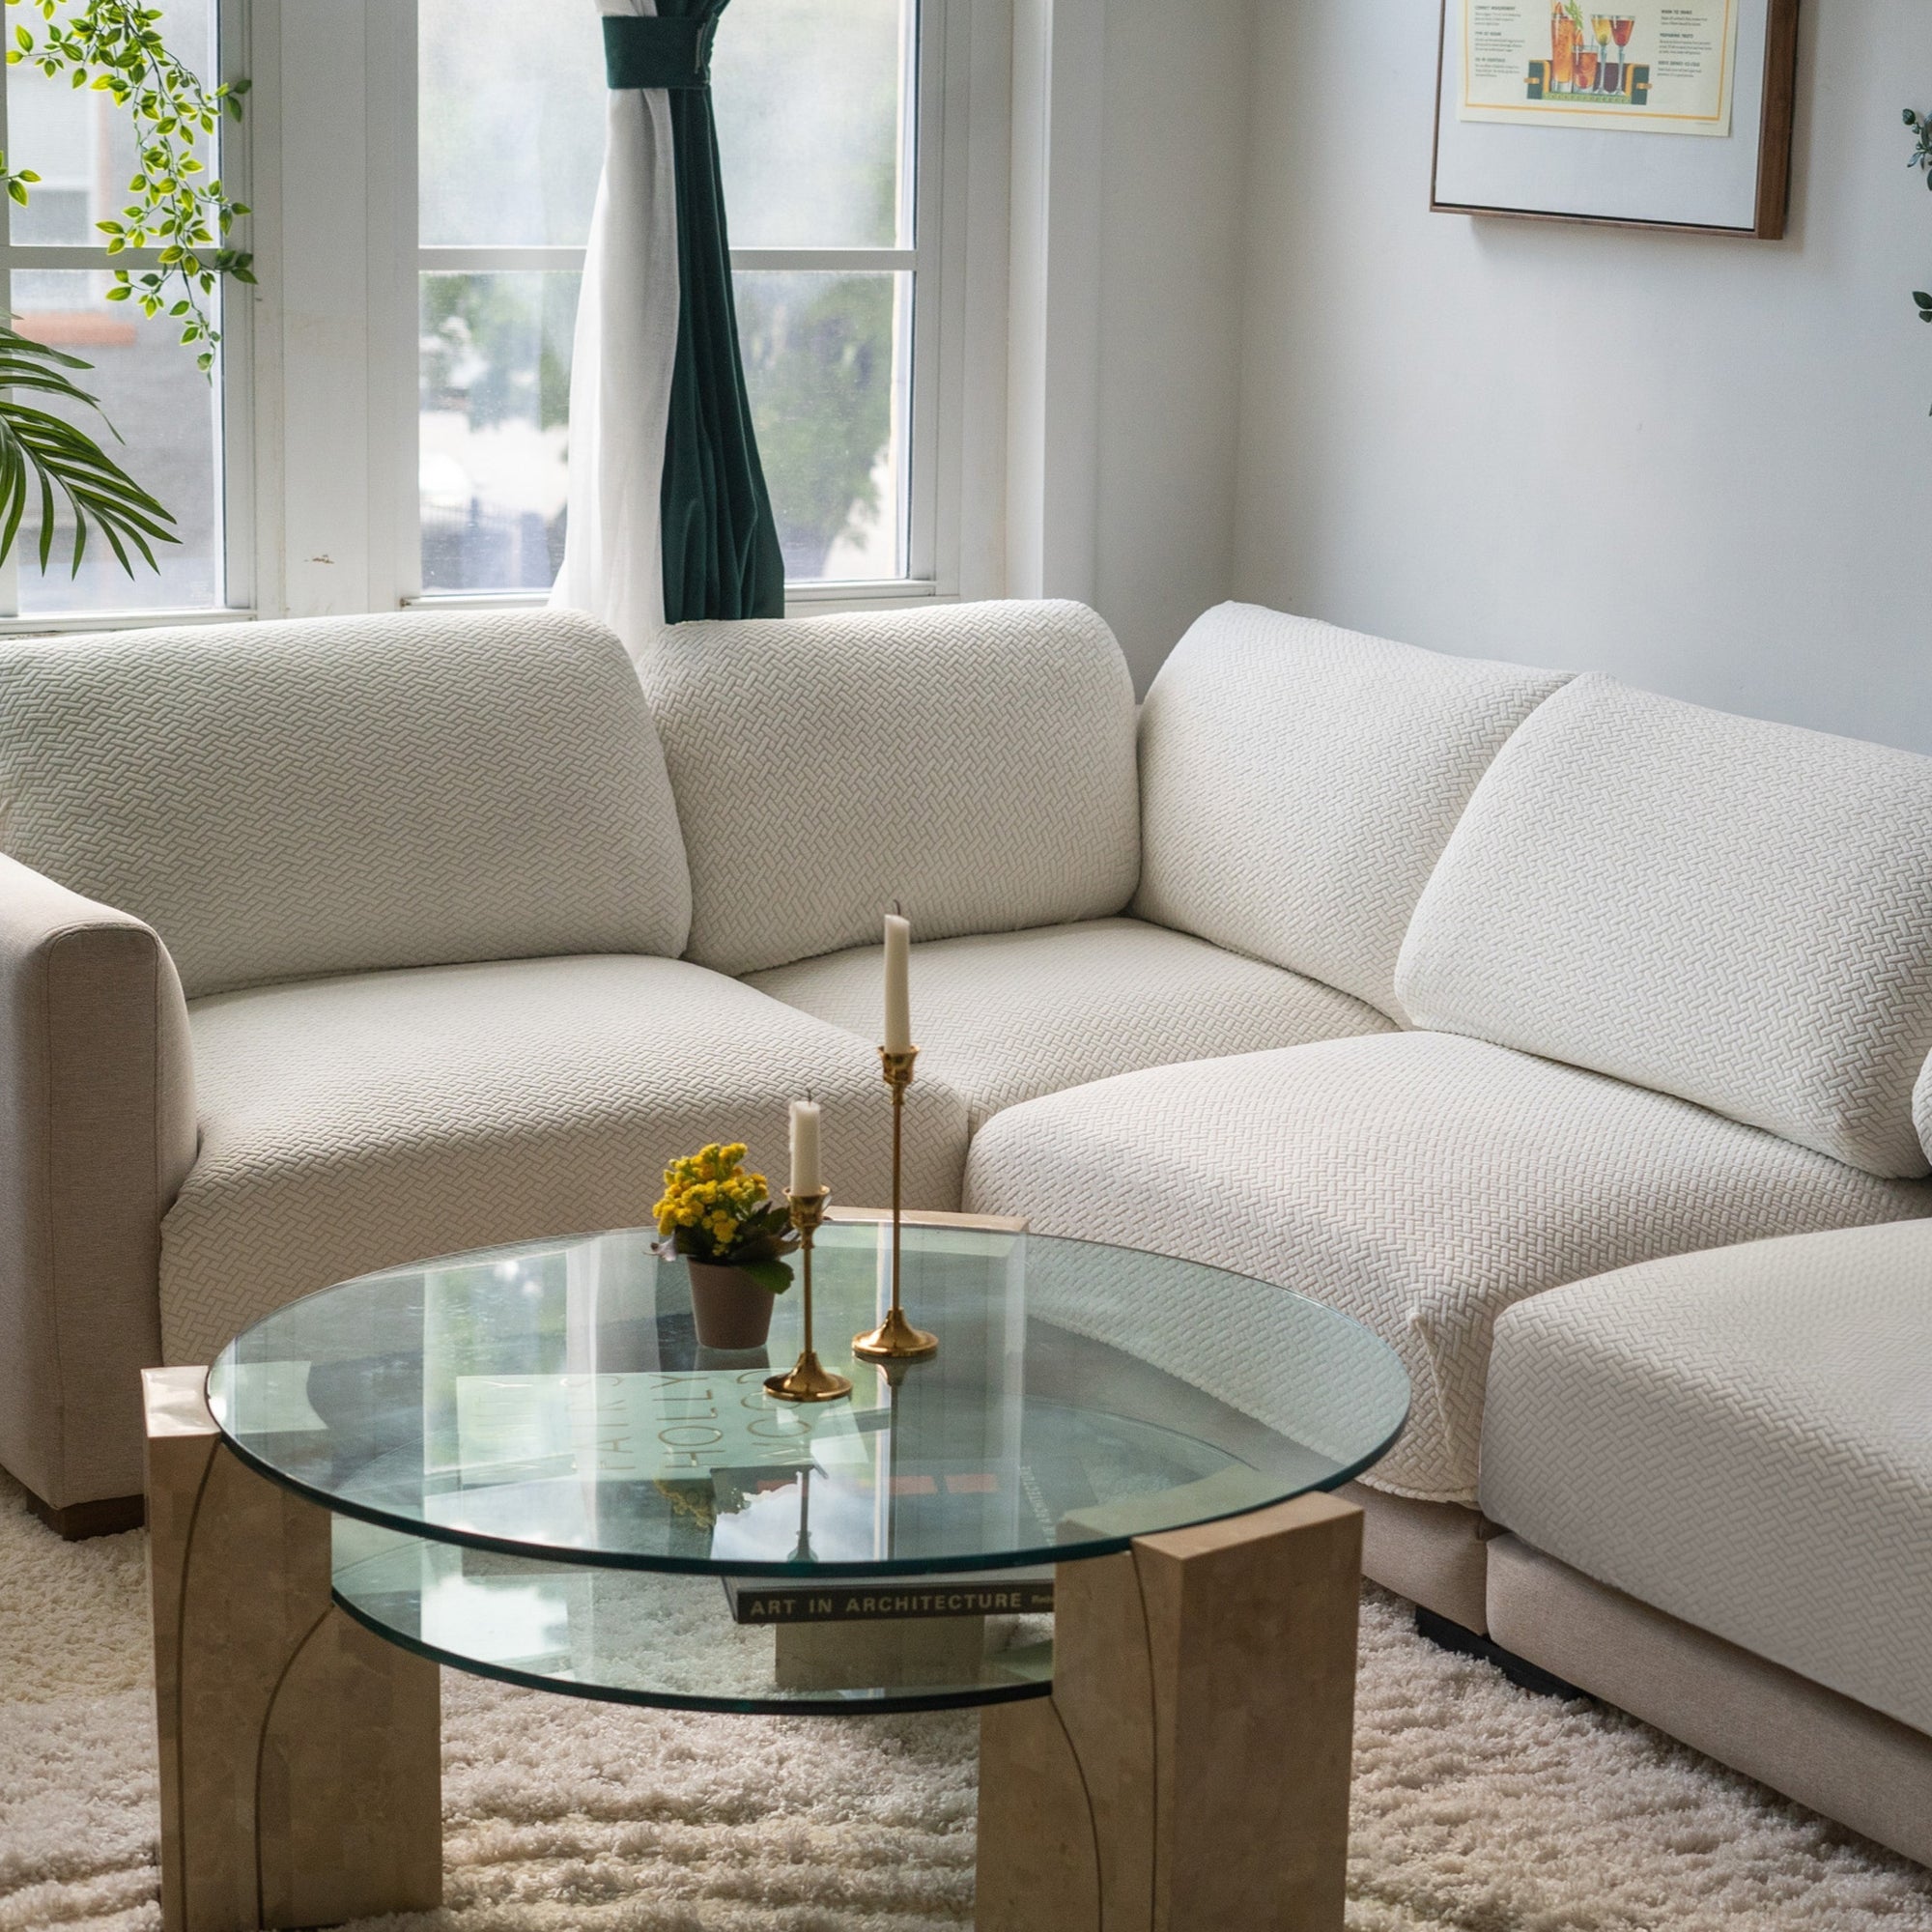 Seasonal Refresh: Updating Your Living Space with U-Shaped Sectional Couch Covers